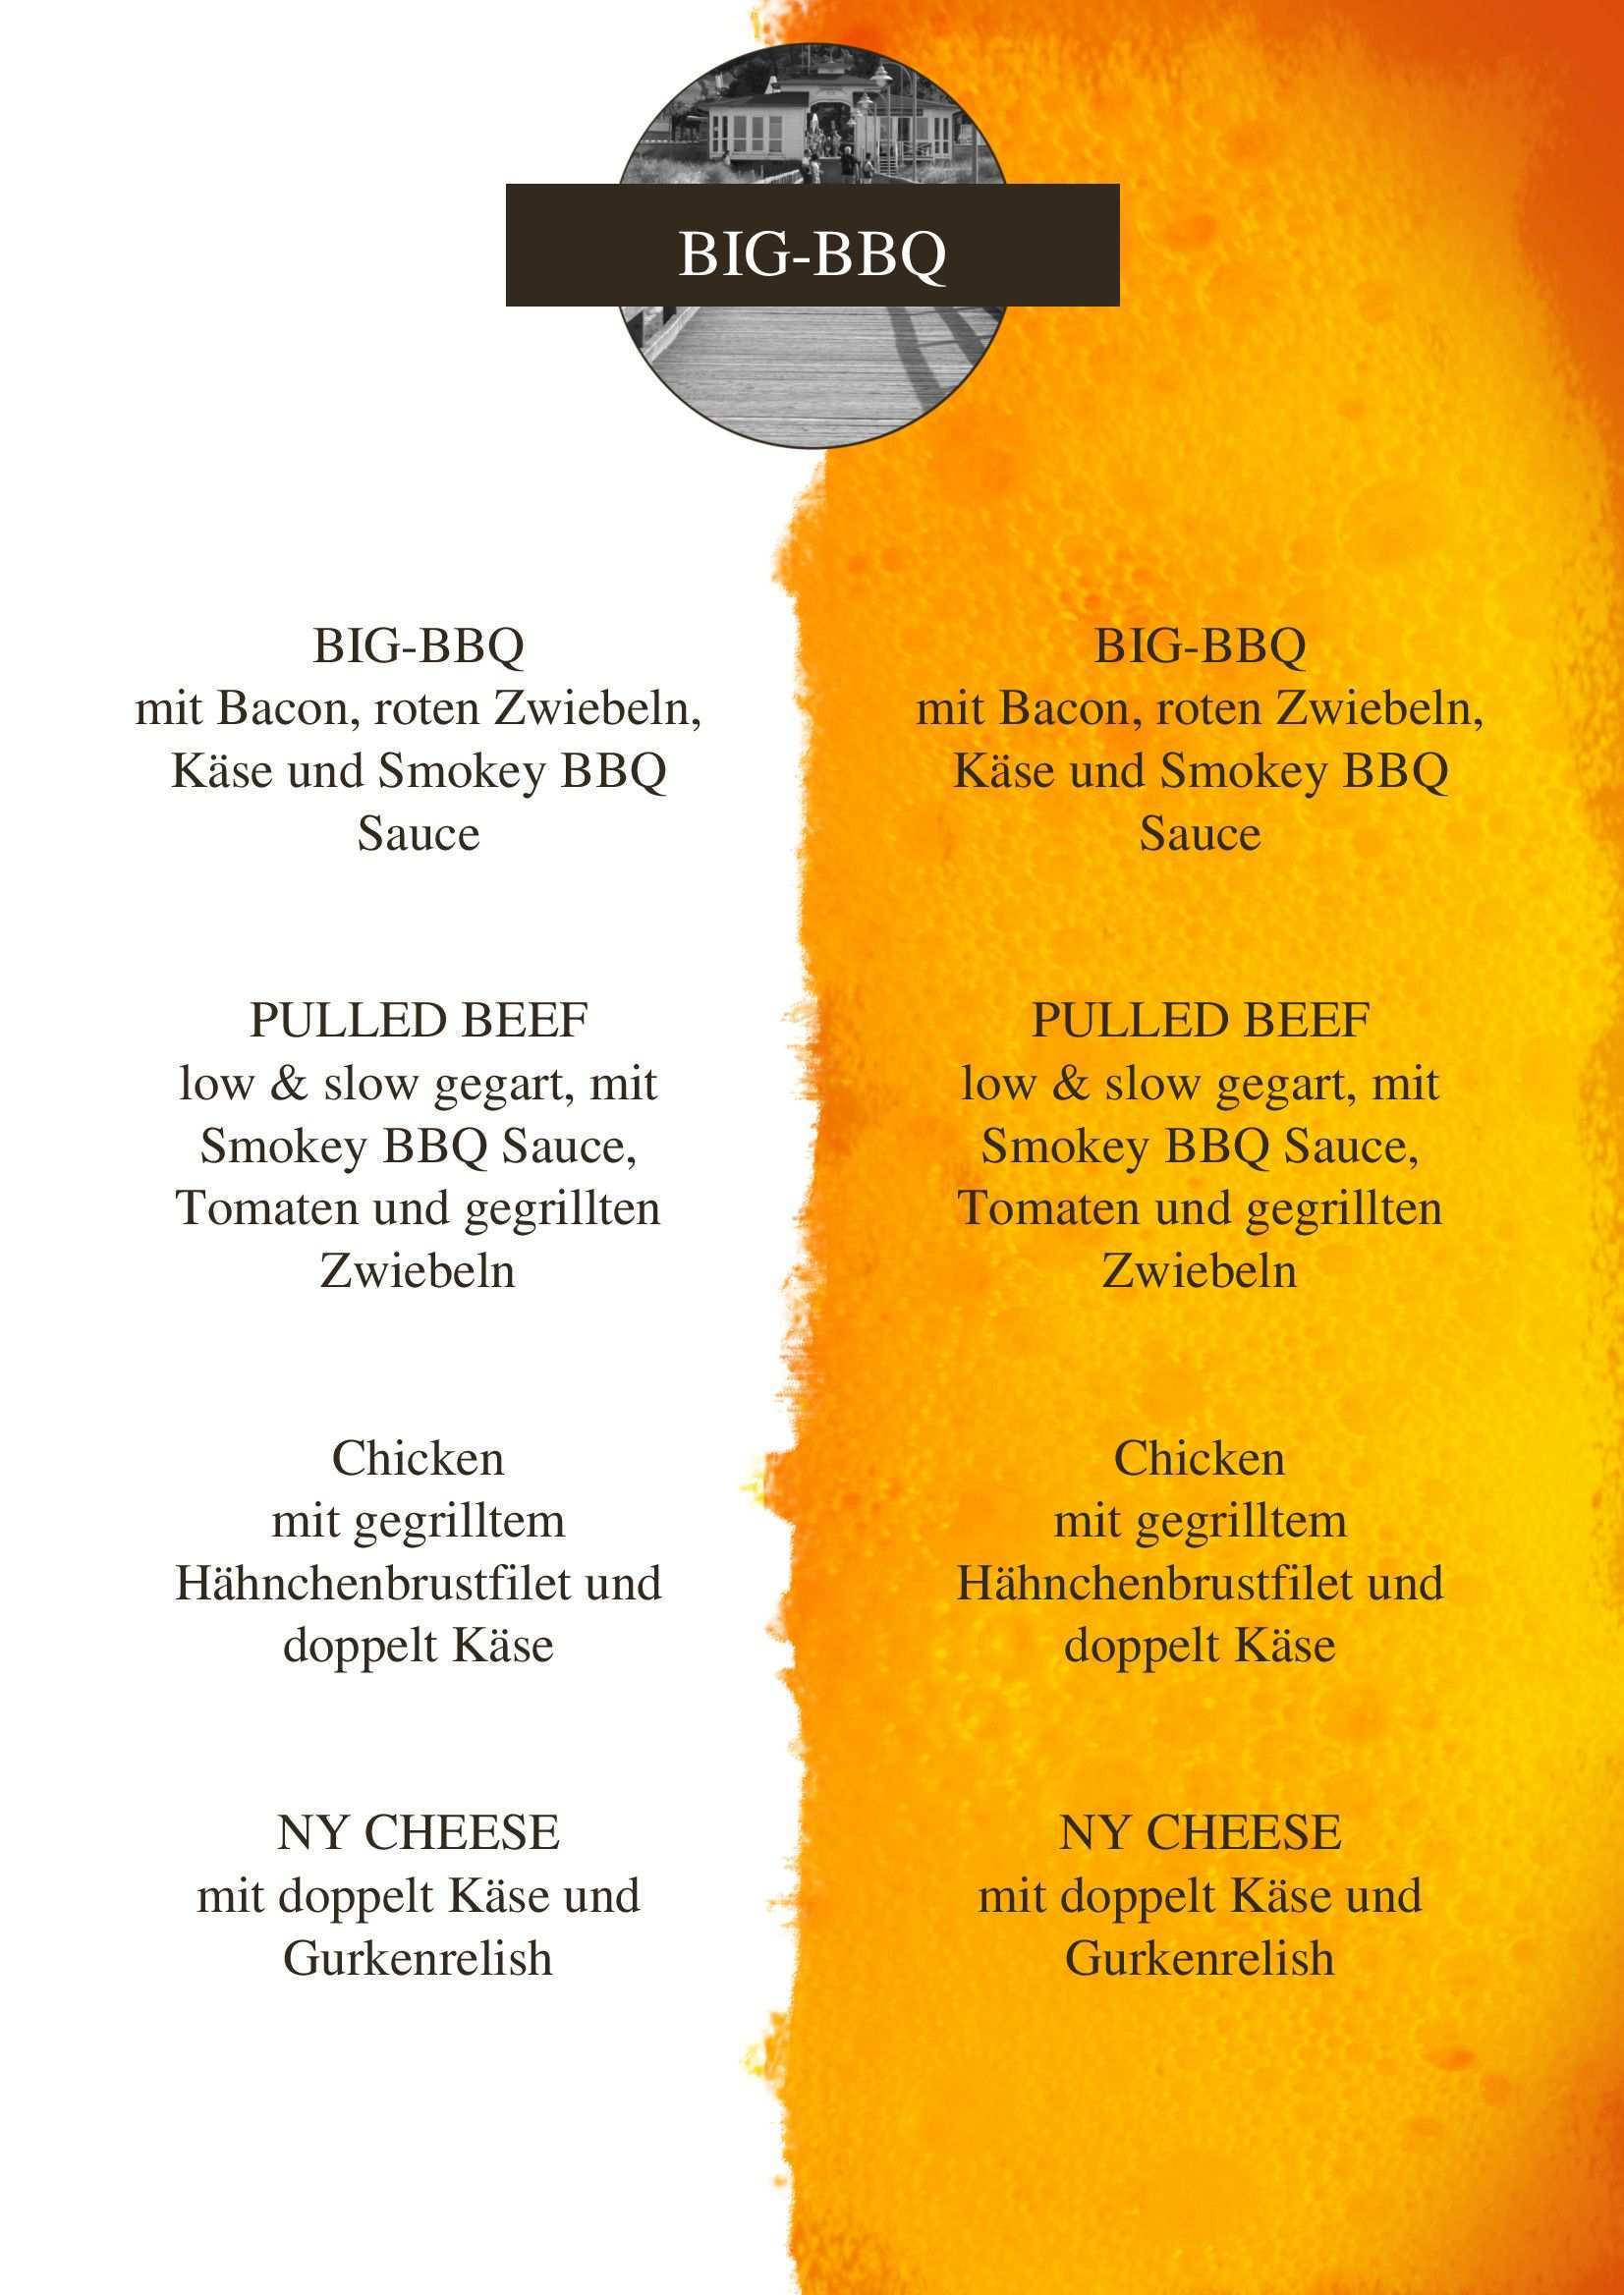 This Menu Template Comes With Has Starters Platters And Combo As The Items Offered On It This Menu Can Be Used By Individuals Speisekarte Grill Menu Bbq Menu